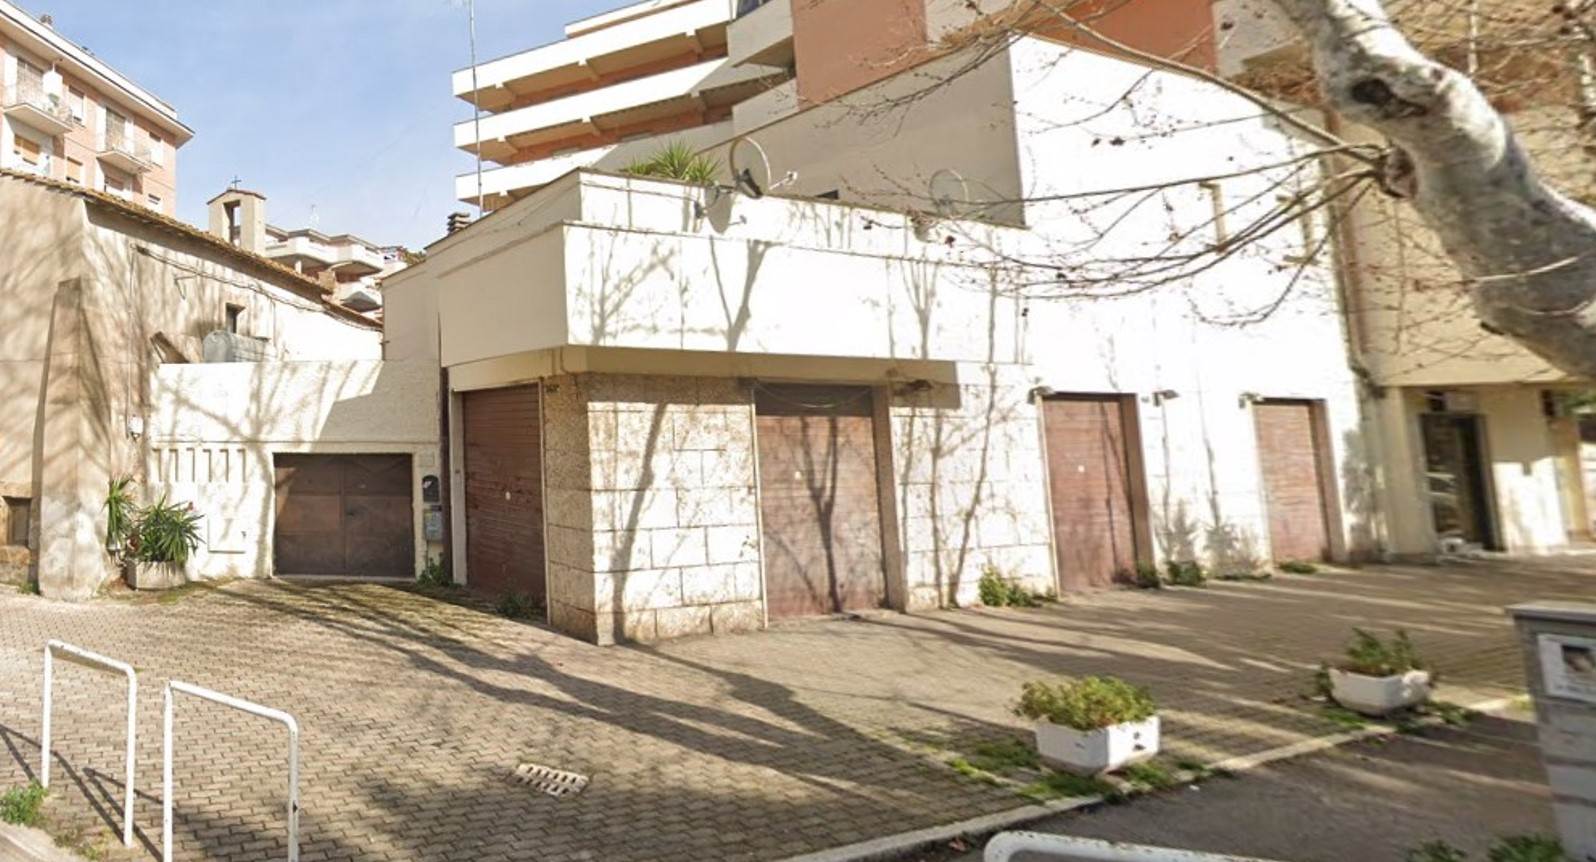 CENTRO, CIVITAVECCHIA, Store for sale of 170 Sq. mt., placed at Ground, composed by: 3 Rooms, 3 Bathrooms, Price: € 340,000